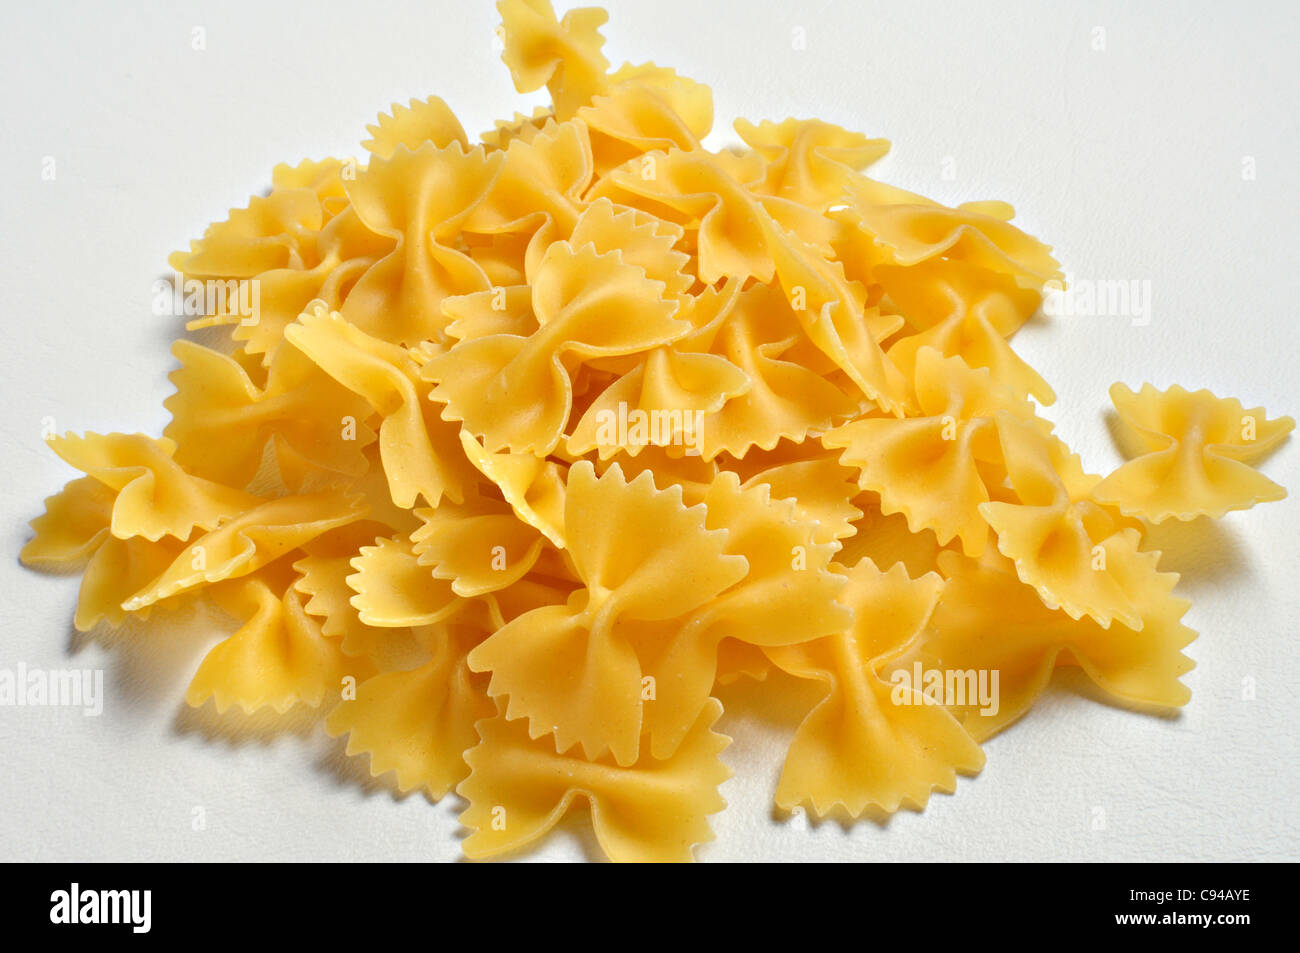 A small pile of dried Farfalle pasta sits on a white background. Stock Photo